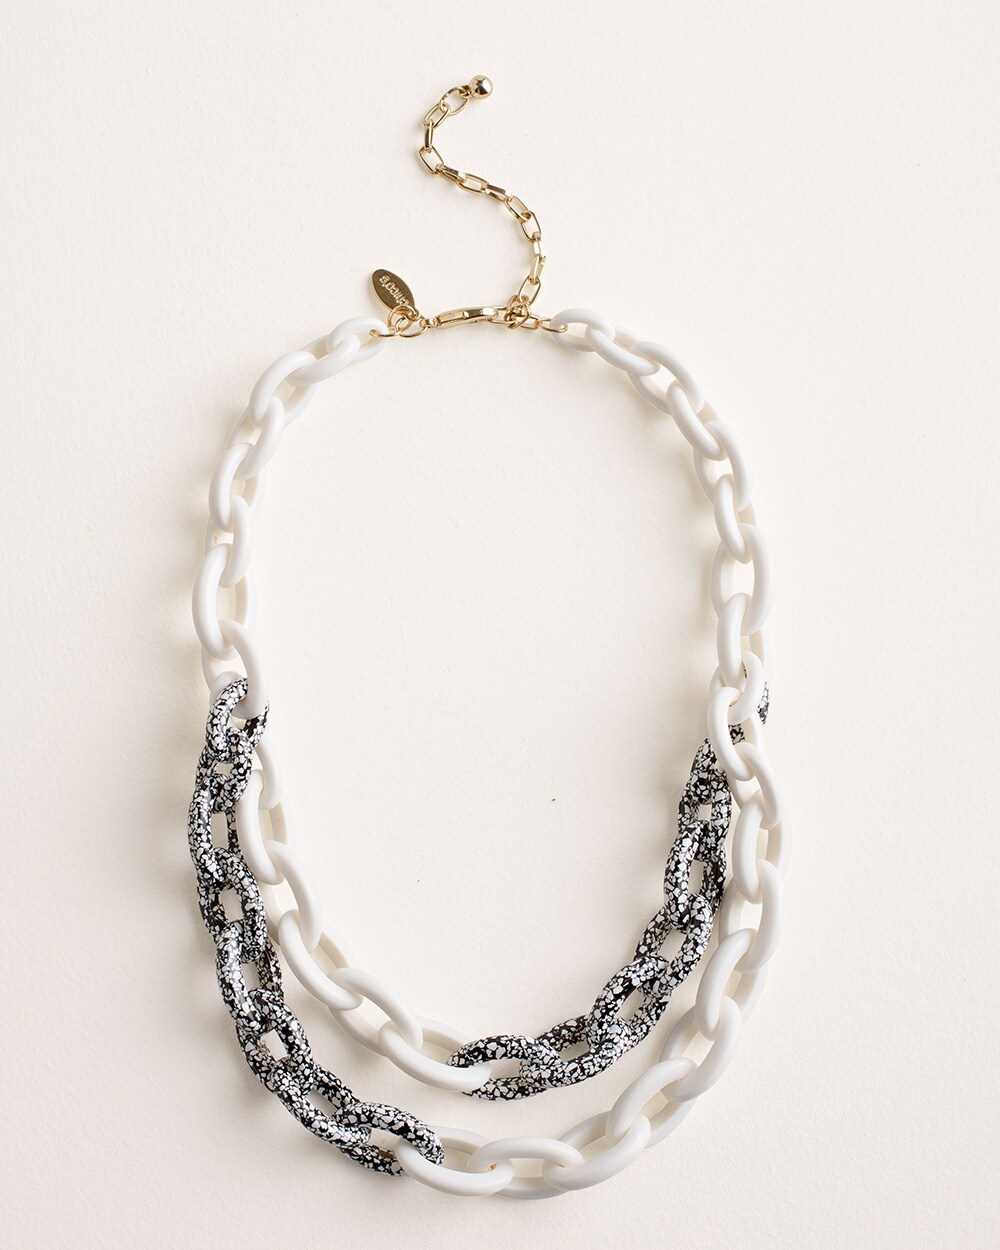 Black and White Chain Link Necklace